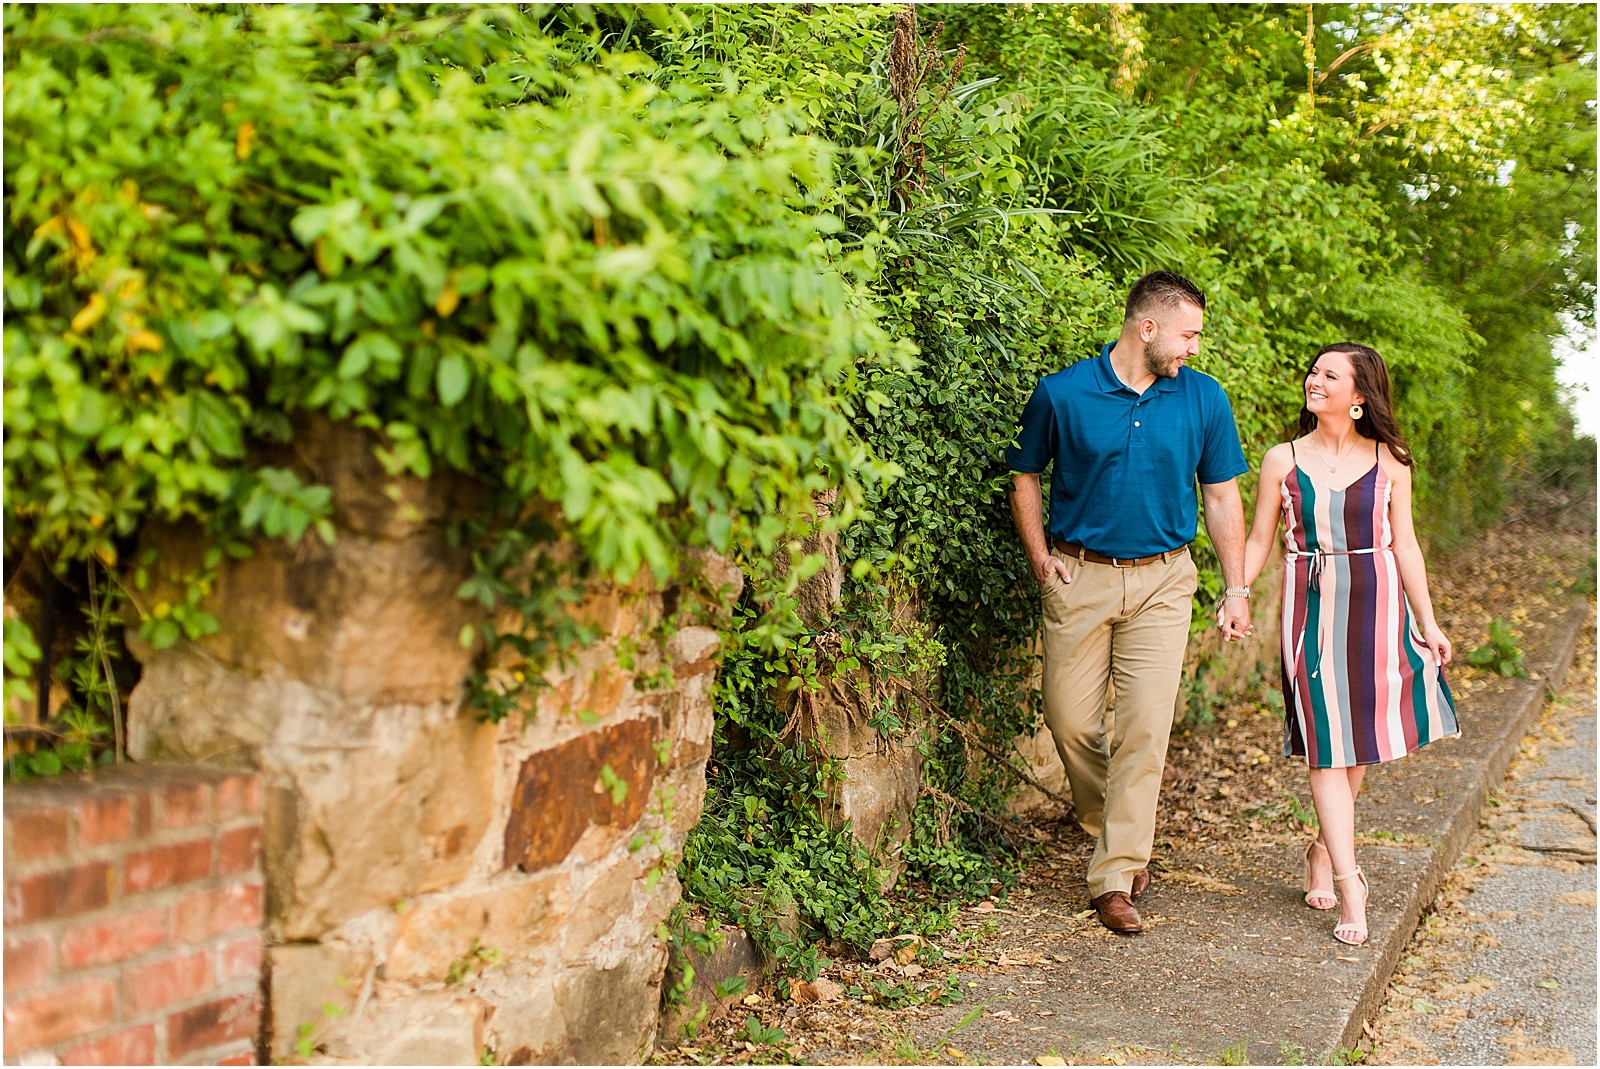 Downtown Newburgh Engagement Session | Matt and Blaire | Bret and Brandie Photography010.jpg